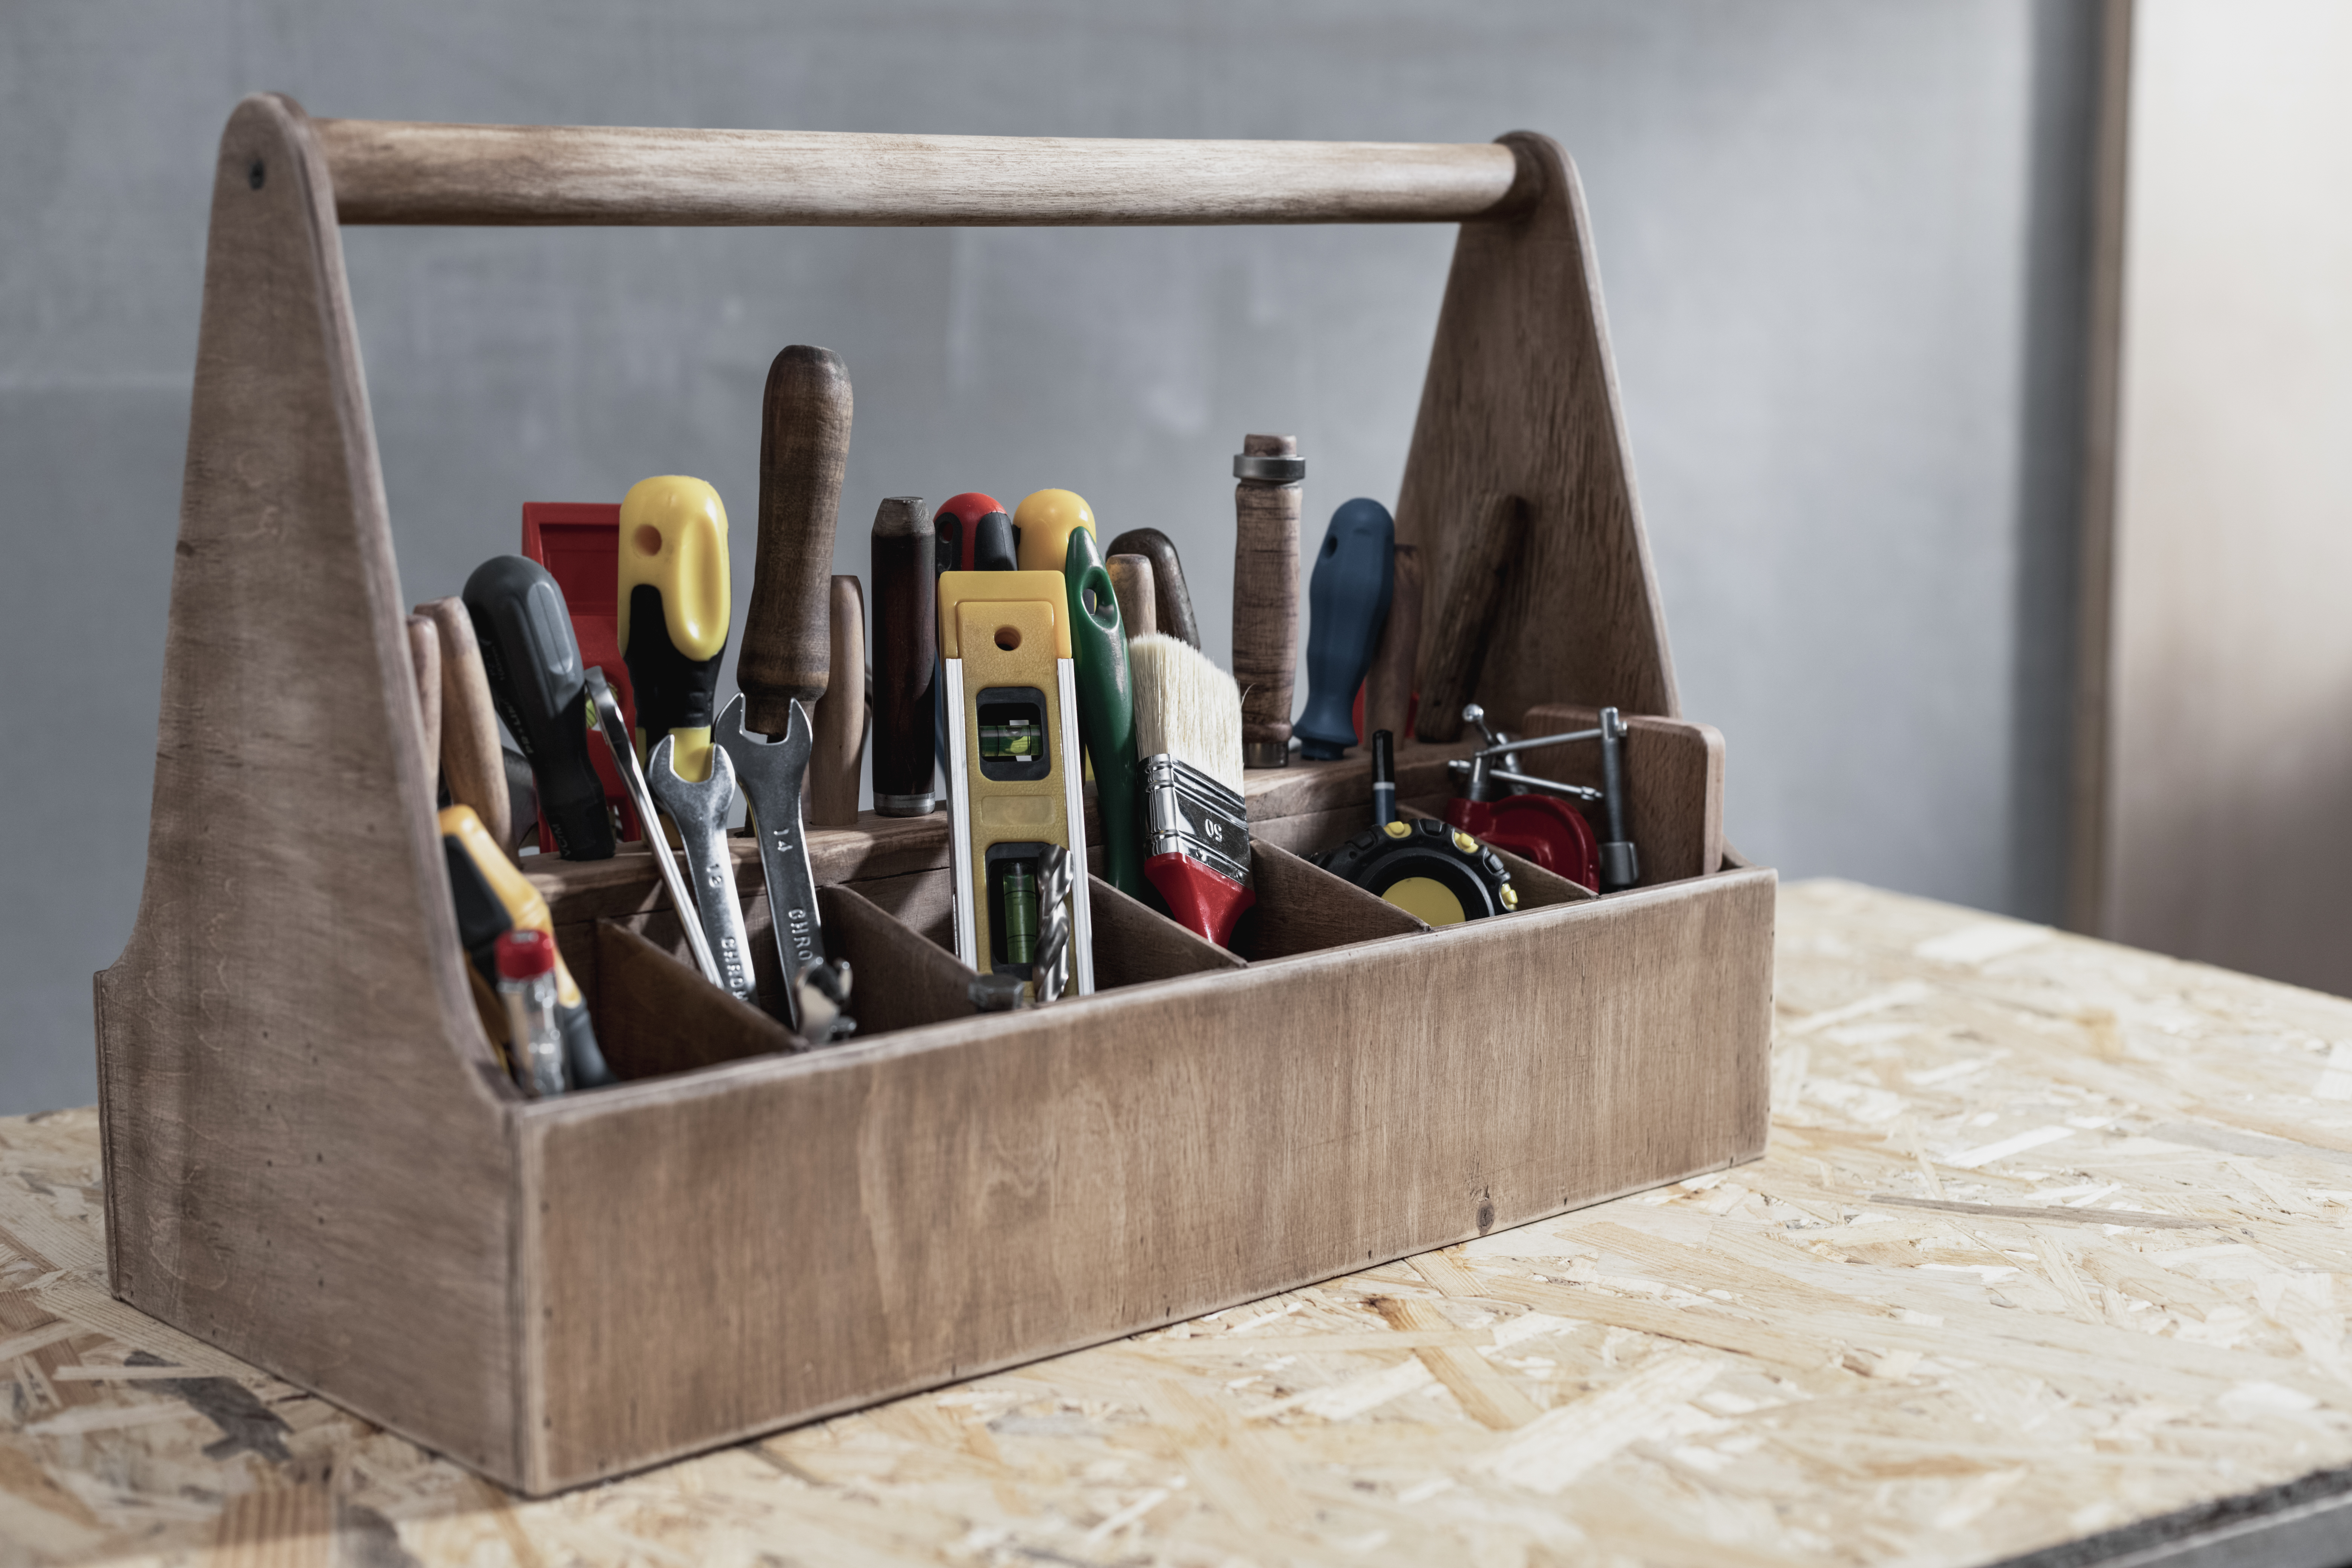 Box of tools on a wooden table